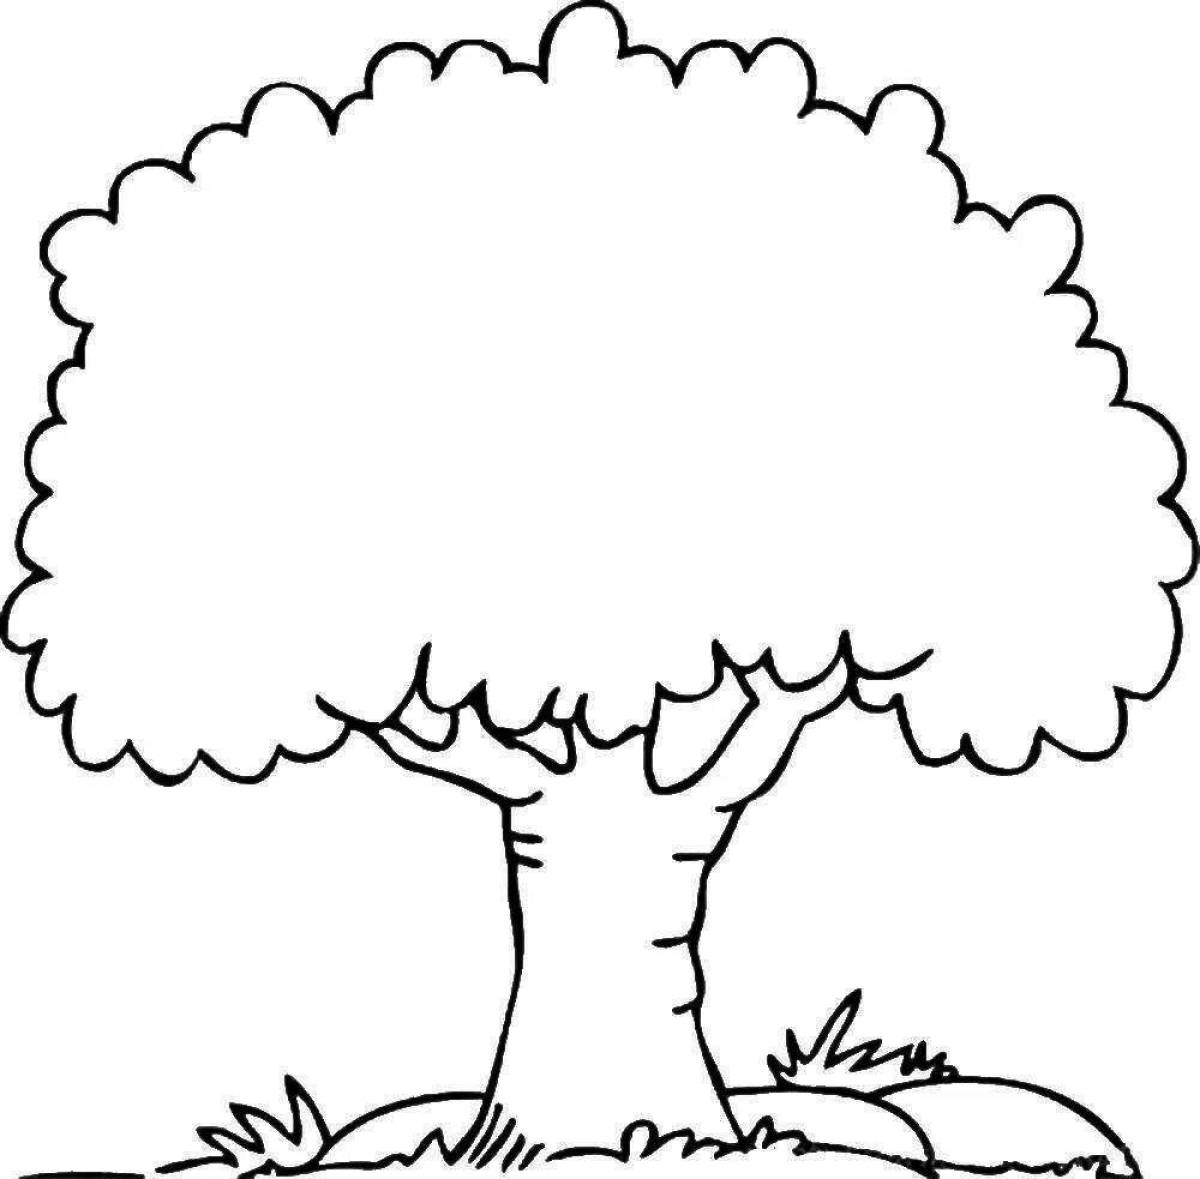 Adorable tree drawing for kids